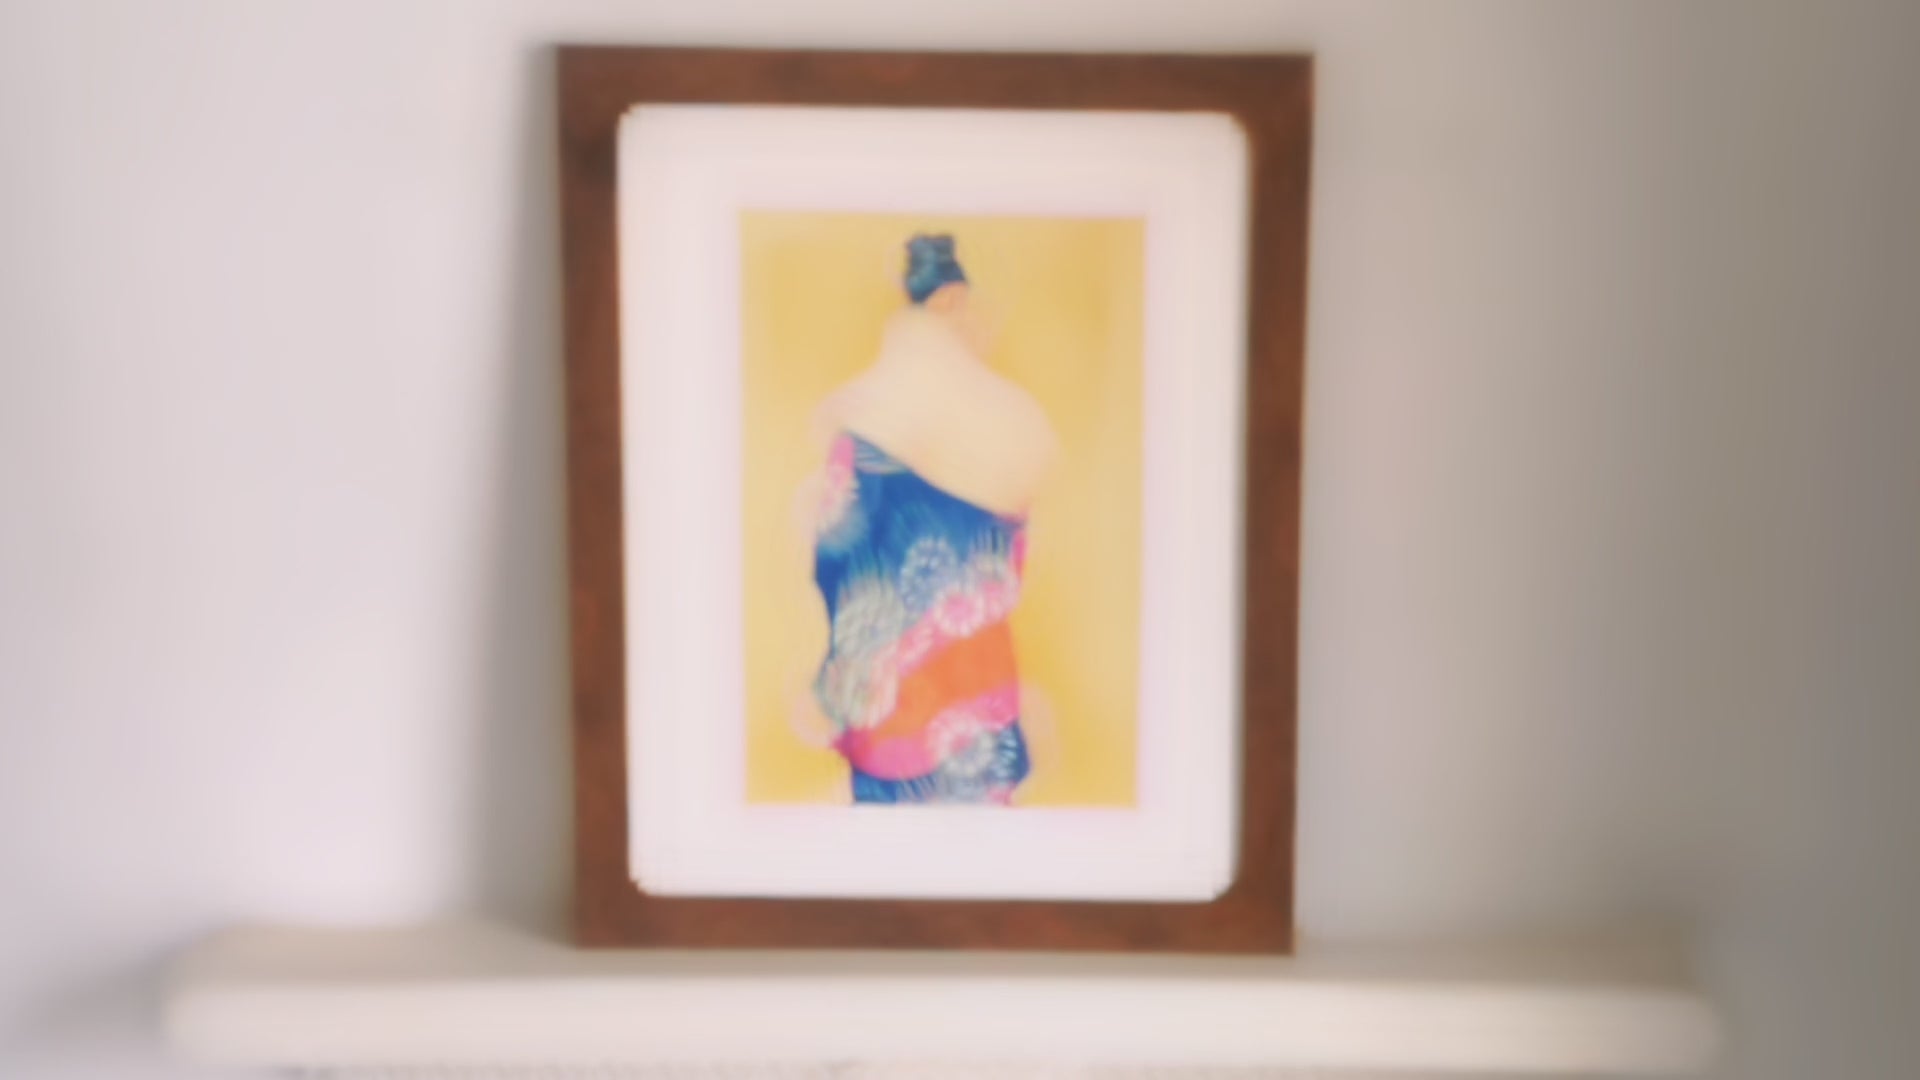 Video of brown framed oil painting with white frame mount. The painting itself is of a woman facing away wearing a blue iris kimono.